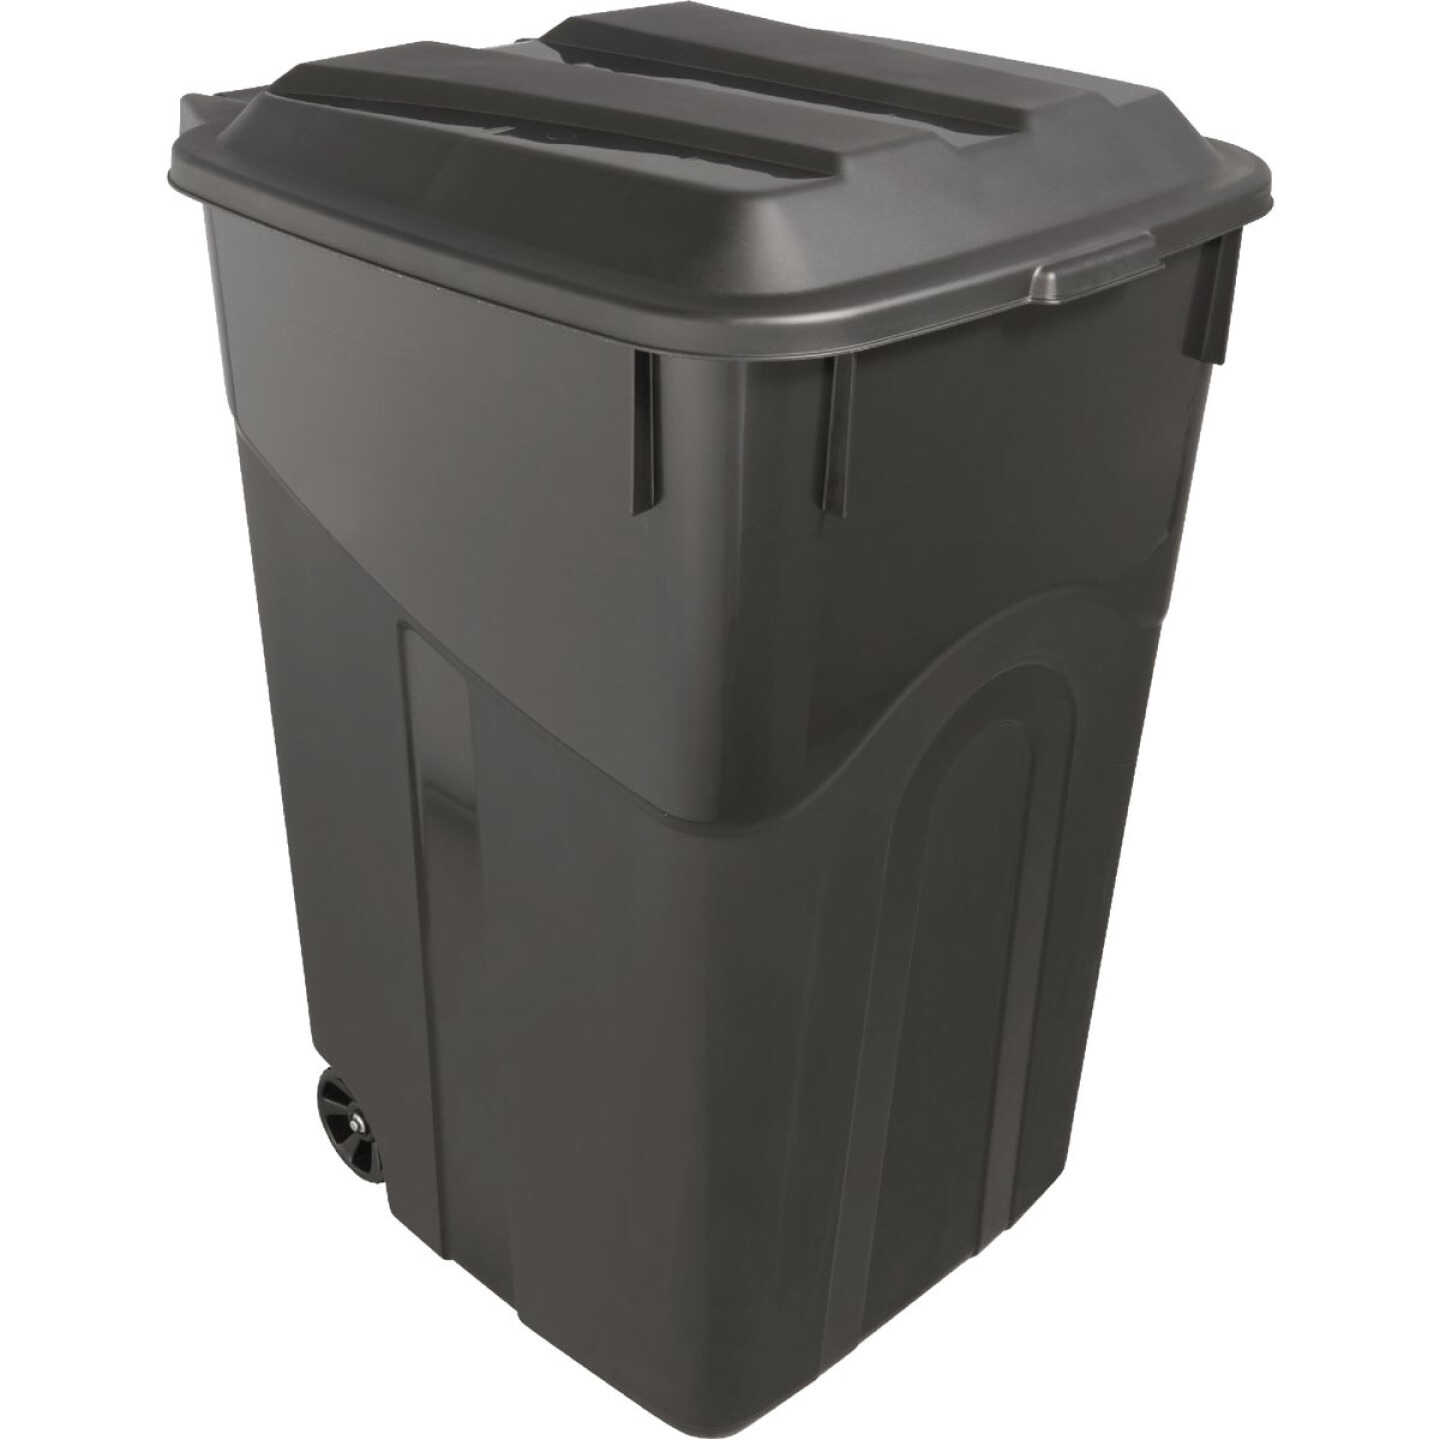 United Solutions RM134501 Trash Can, 45 gal Capacity, Pla